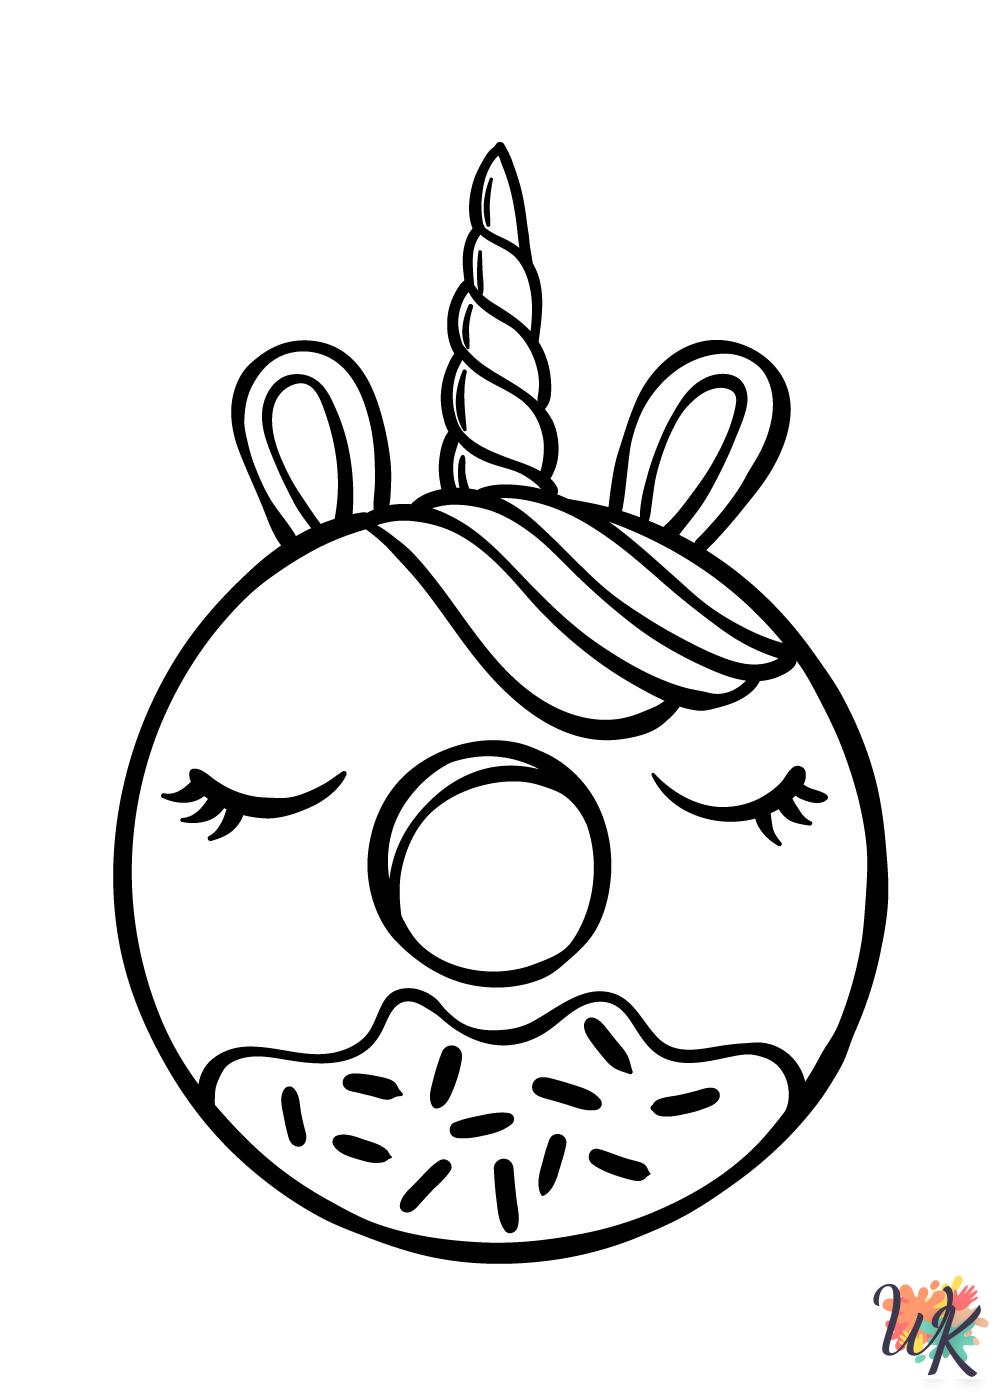 Donut themed coloring pages